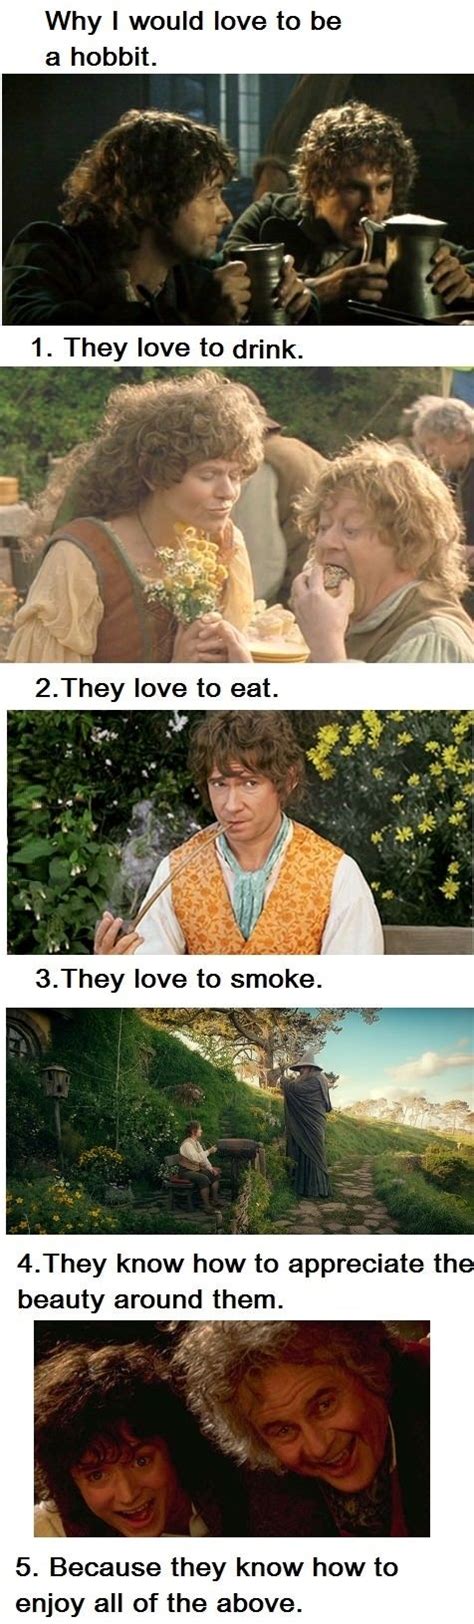 Why I Want To Be A Hobbit The Hobbit Lord Of The Rings Daily Funny